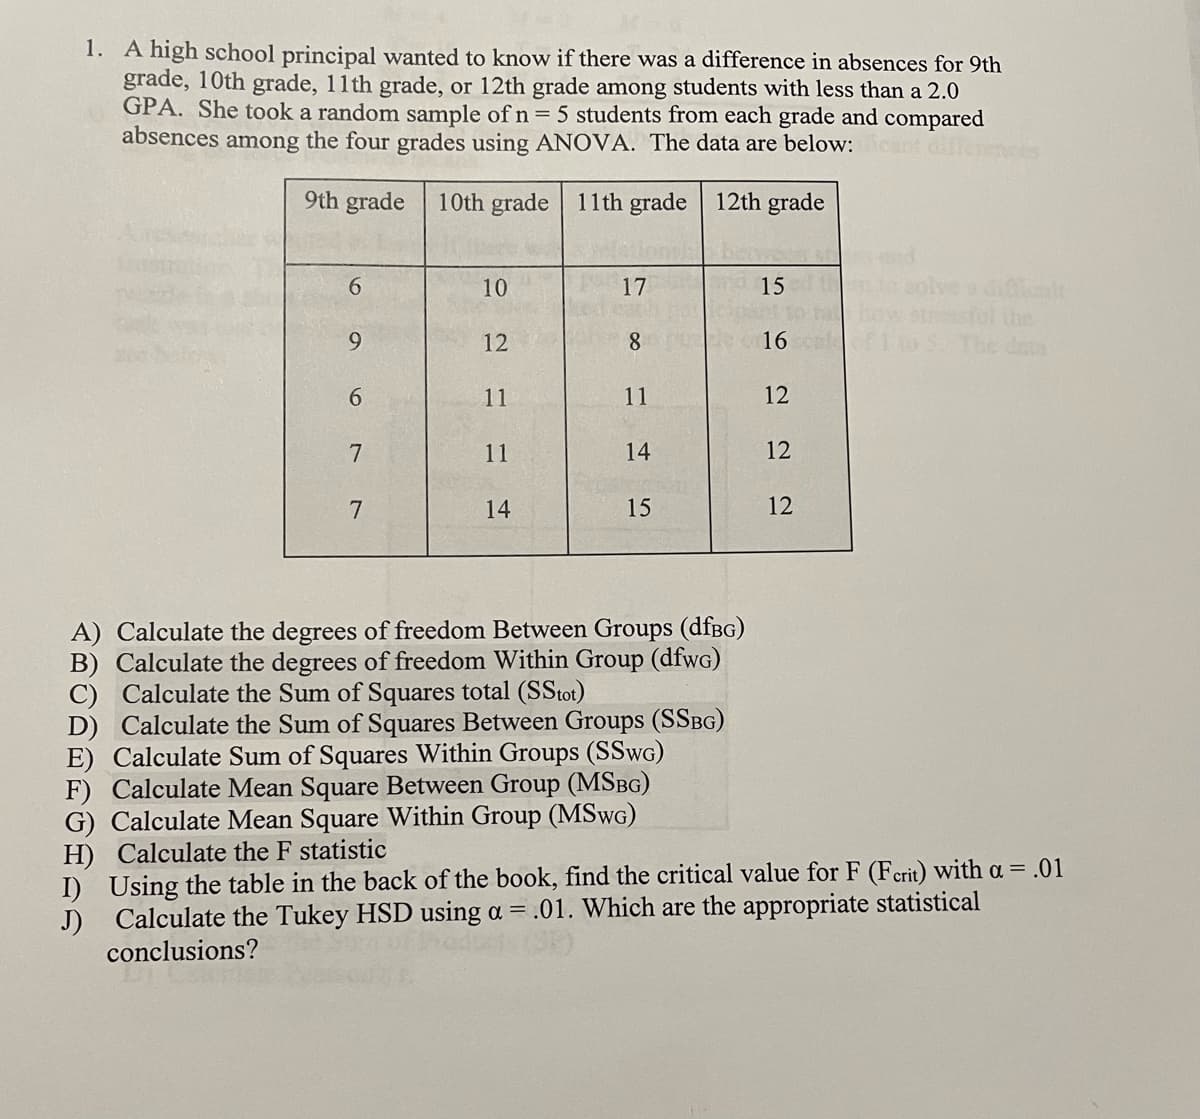 1. A high school principal wanted to know if there was a difference in absences for 9th
grade, 10th grade, 11th grade, or 12th grade among students with less than a 2.0
GPA. She took a random sample of n = 5 students from each grade and compared
absences among the four grades using ANOVA. The data are below:
9th grade
10th grade 11 th grade 12th grade
vee ditiont
ssfol the
The data
10
17
15
9.
12
8.
16
6.
11
11
12
7
11
14
12
7
14
15
12
A) Calculate the degrees of freedom Between Groups (dfBG)
B) Calculate the degrees of freedom Within Group (dfwG)
C) Calculate the Sum of Squares total (SStot)
D) Calculate the Sum of Squares Between Groups (SSBG)
E) Calculate Sum of Squares Within Groups (SSWG)
F) Calculate Mean Square Between Group (MSBG)
G) Calculate Mean Square Within Group (MSWG)
H) Calculate the F statistic
I) Using the table in the back of the book, find the critical value for F (Ferit) with a = .01
J) Calculate the Tukey HSD using a = .01. Which are the appropriate statistical
conclusions?
6
